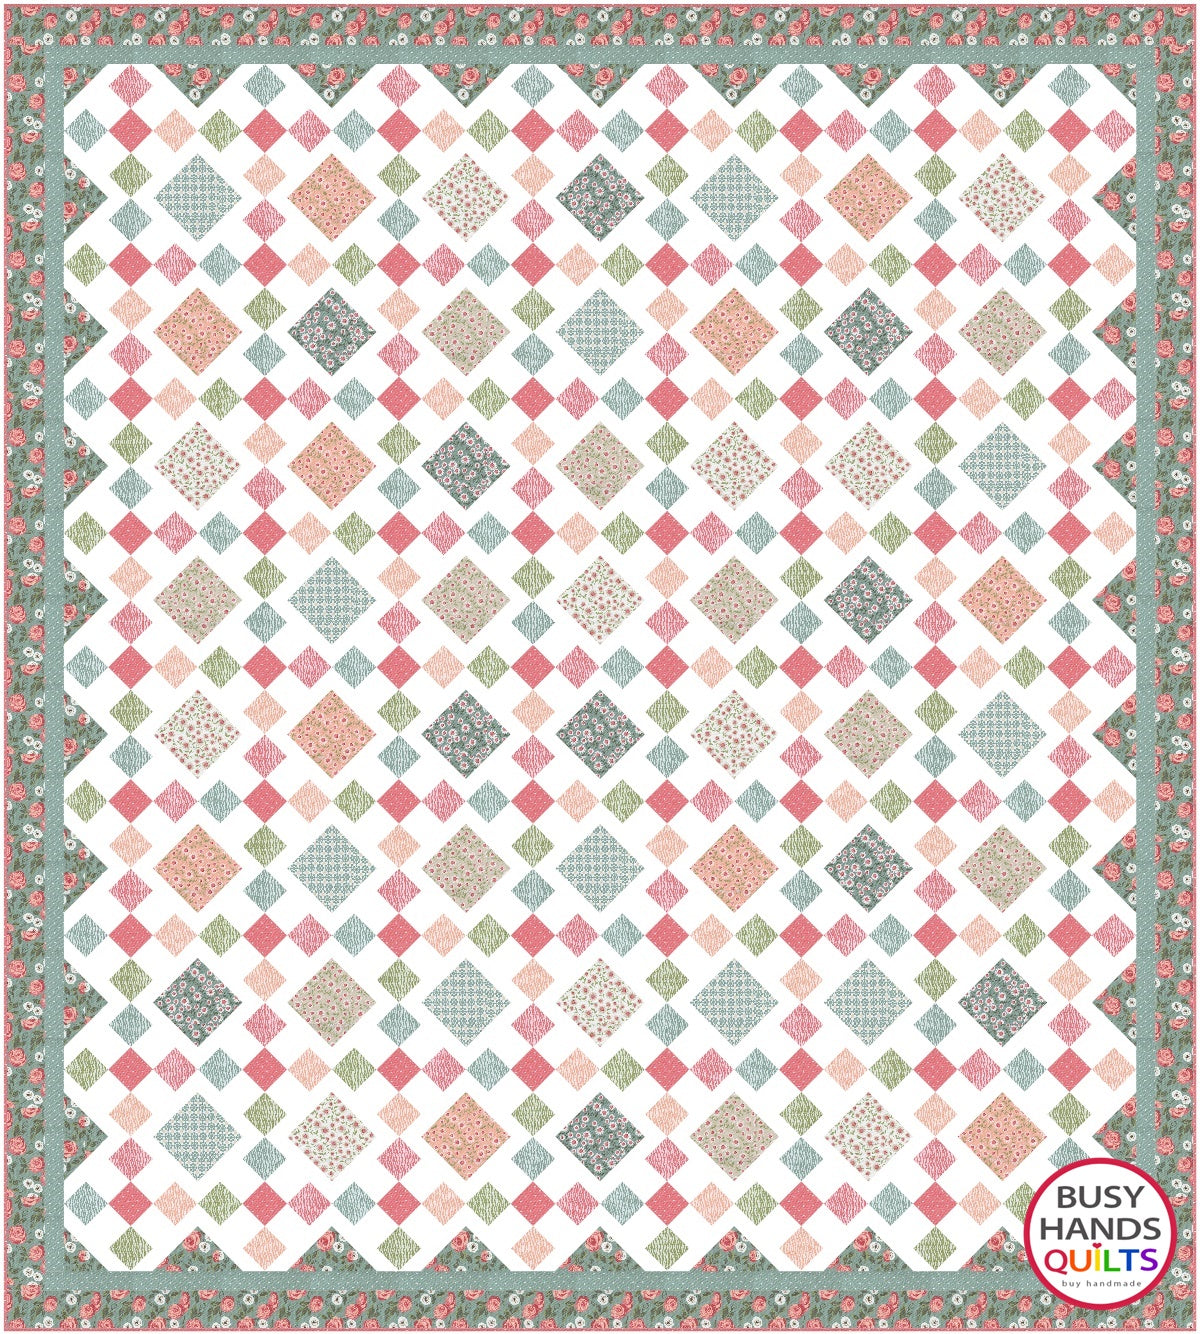 Granny's Square Patch Quilt Pattern PDF DOWNLOAD